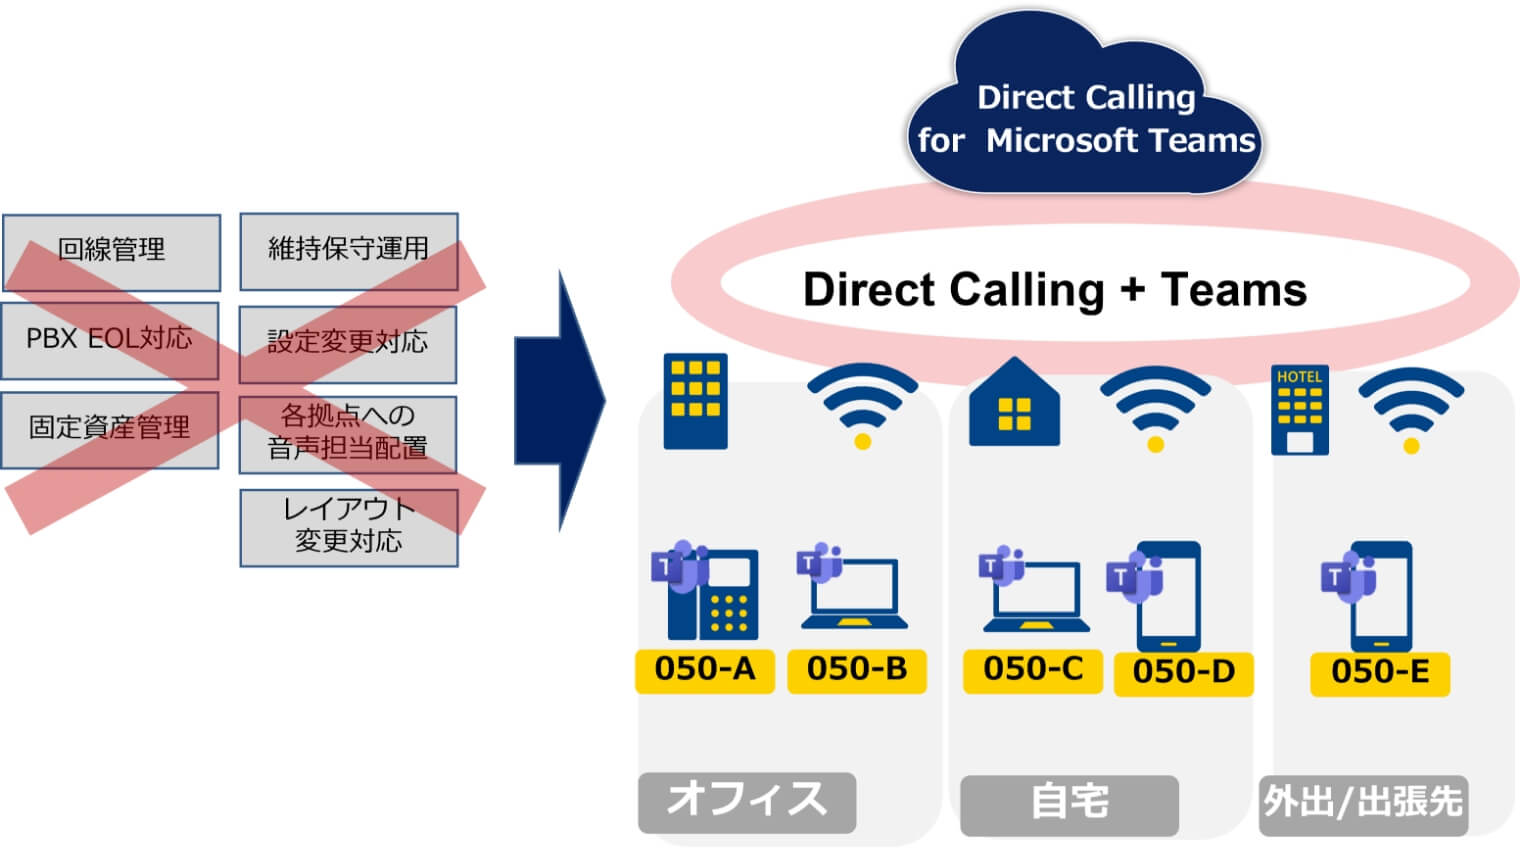 Direct Calling for Microsoft Teams